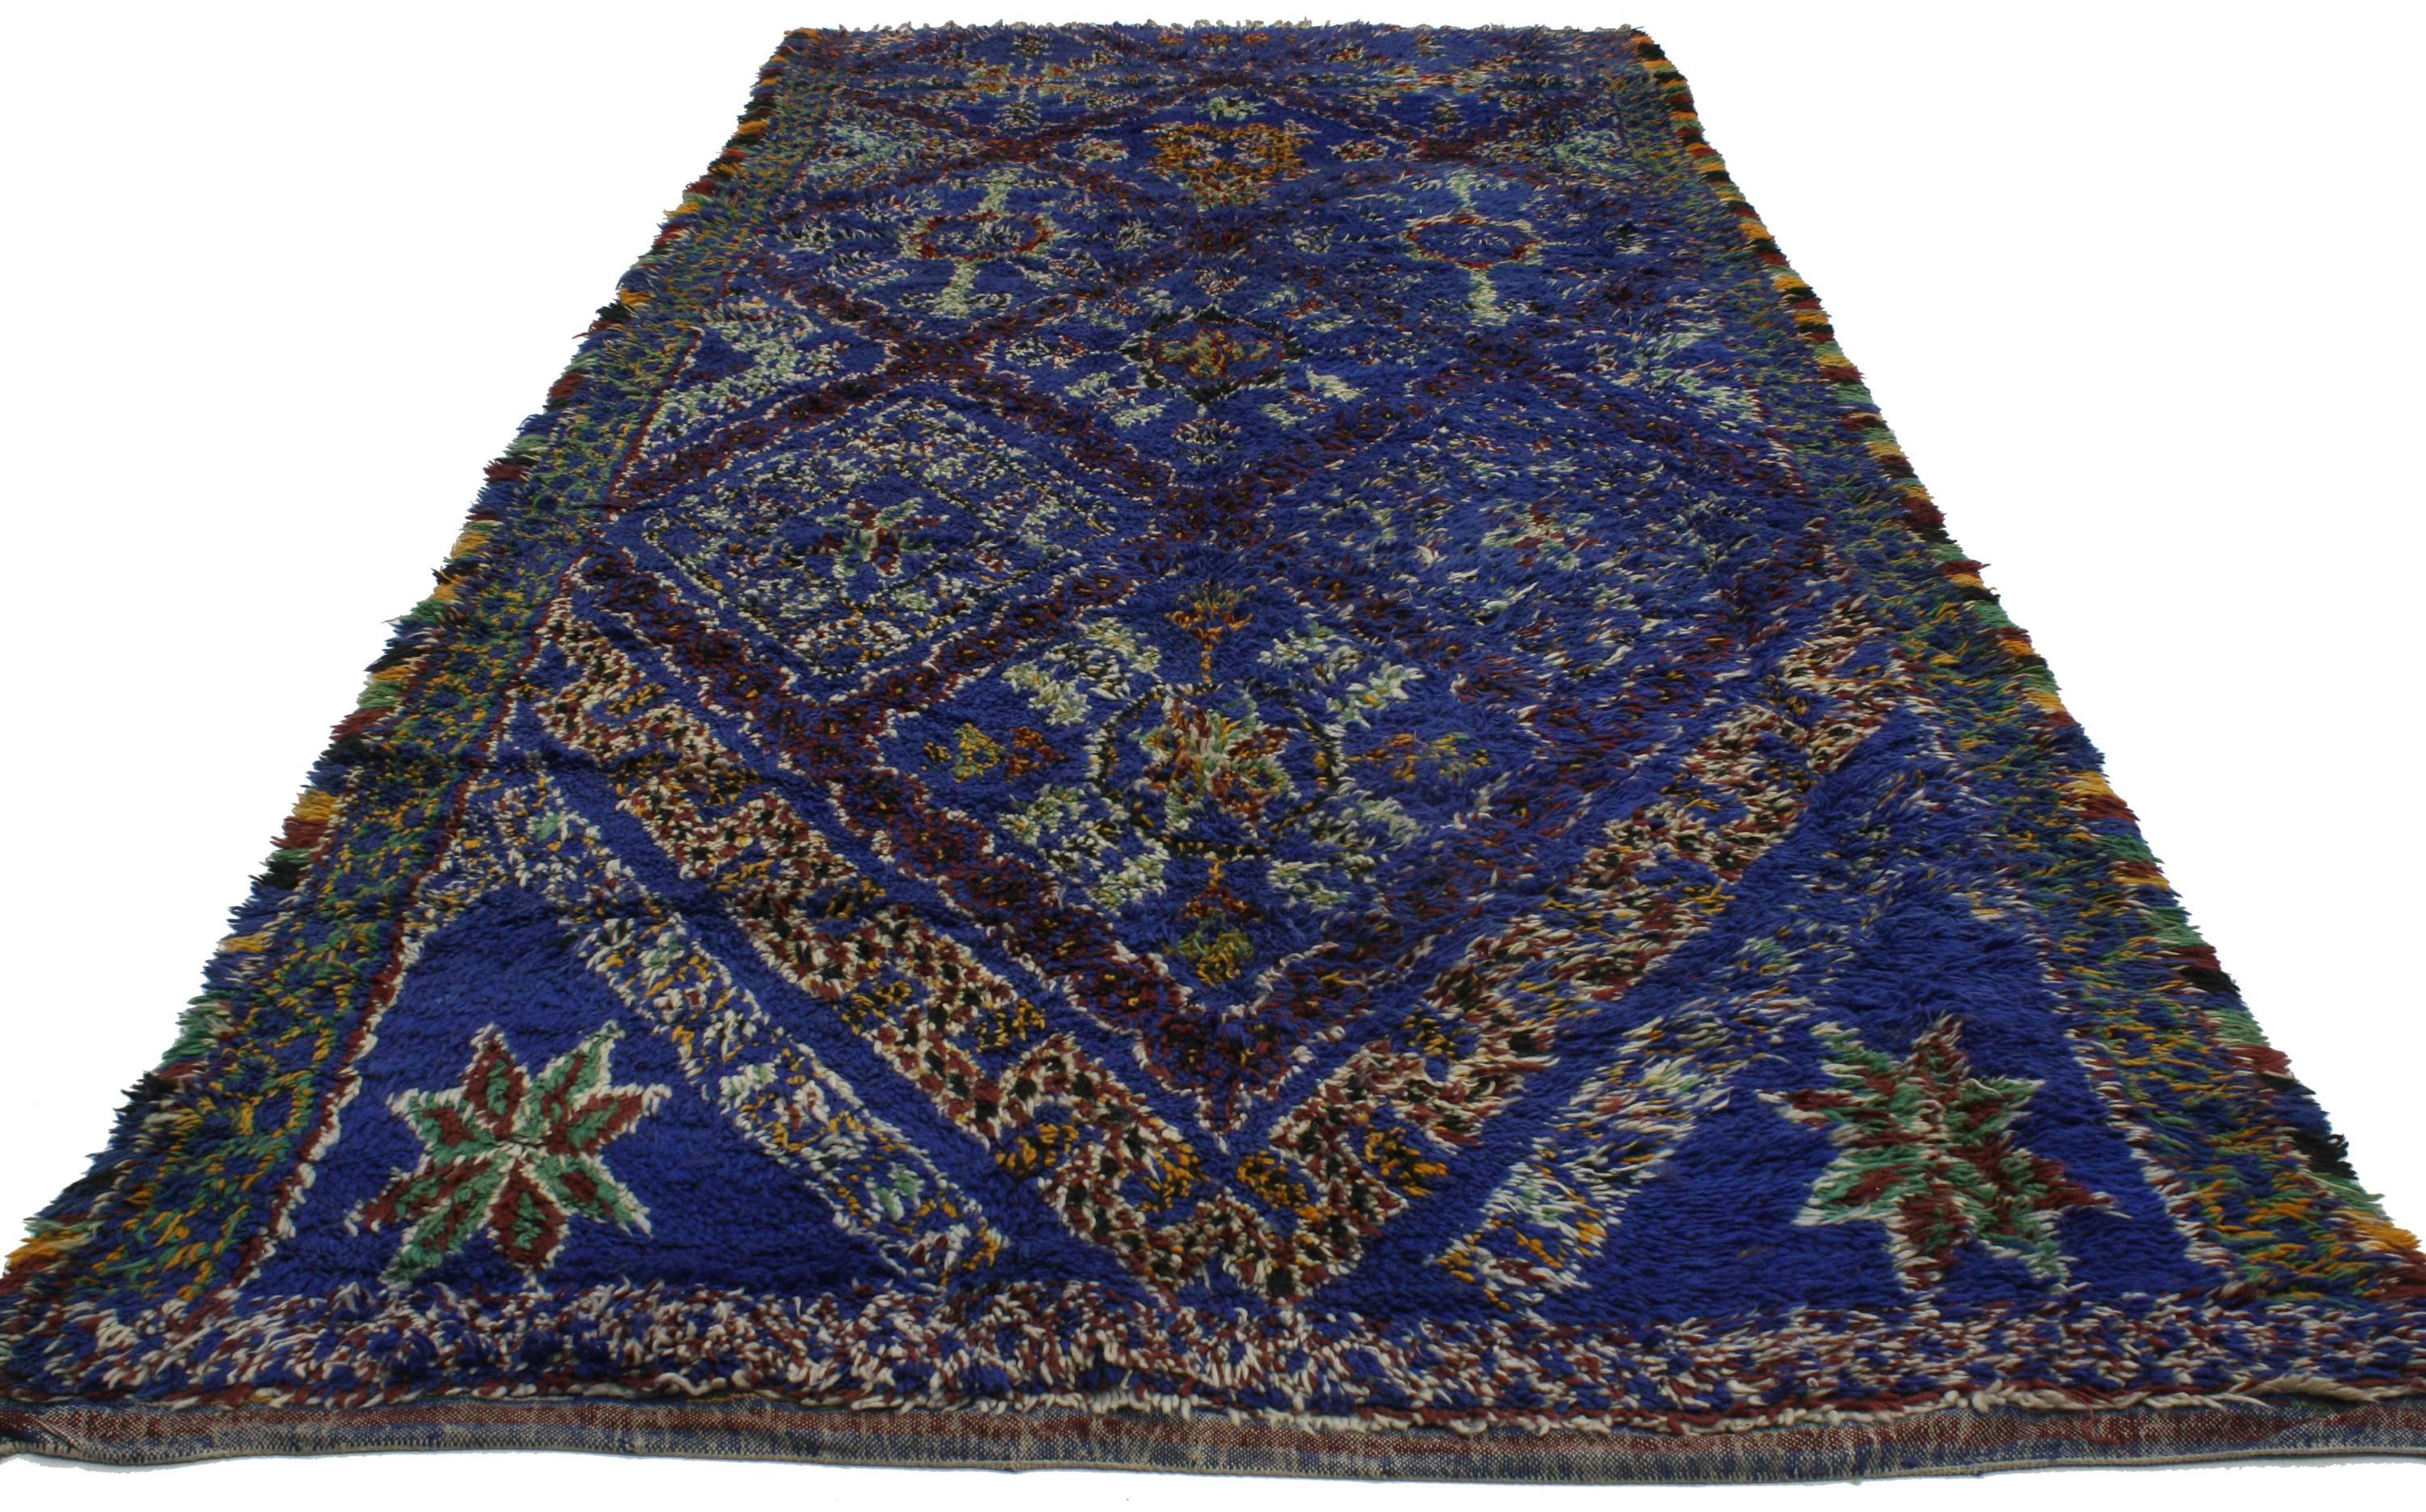 Featuring a saturated palette of cobalt blue, this plush piled Beni Ourain carpet will transform a plain room into a lively space. Giving a youthful and whimsical feel with its tribal motifs, Moroccan rugs can add much-needed color, warmth and